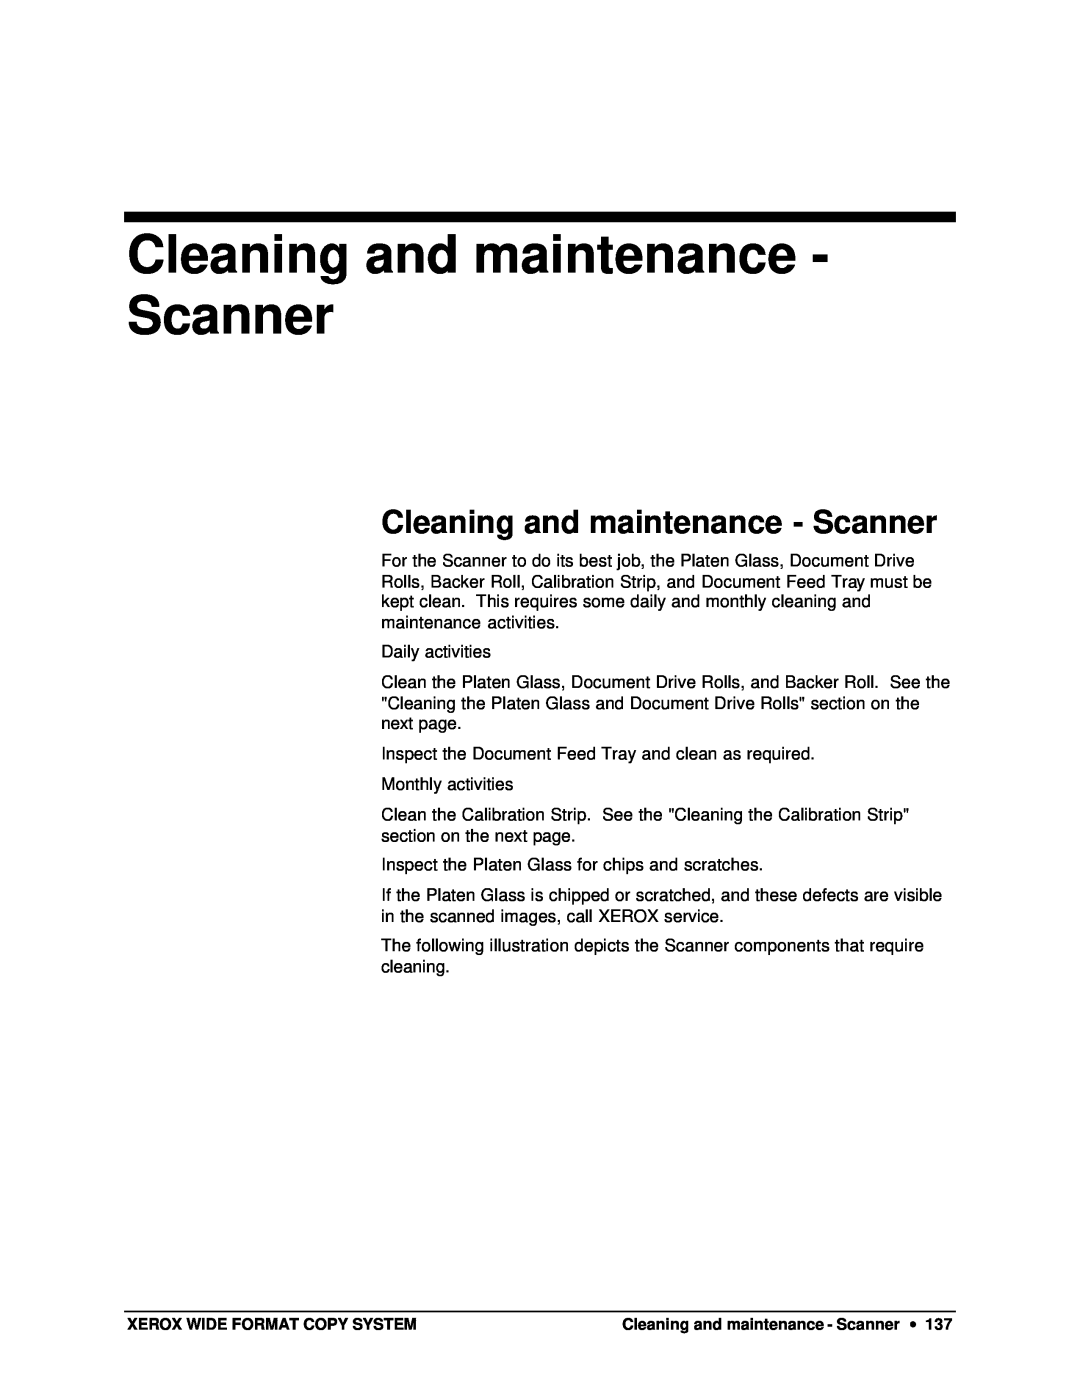 Xerox X2, 8825, 8850, 8830 manual Cleaning and maintenance - Scanner 